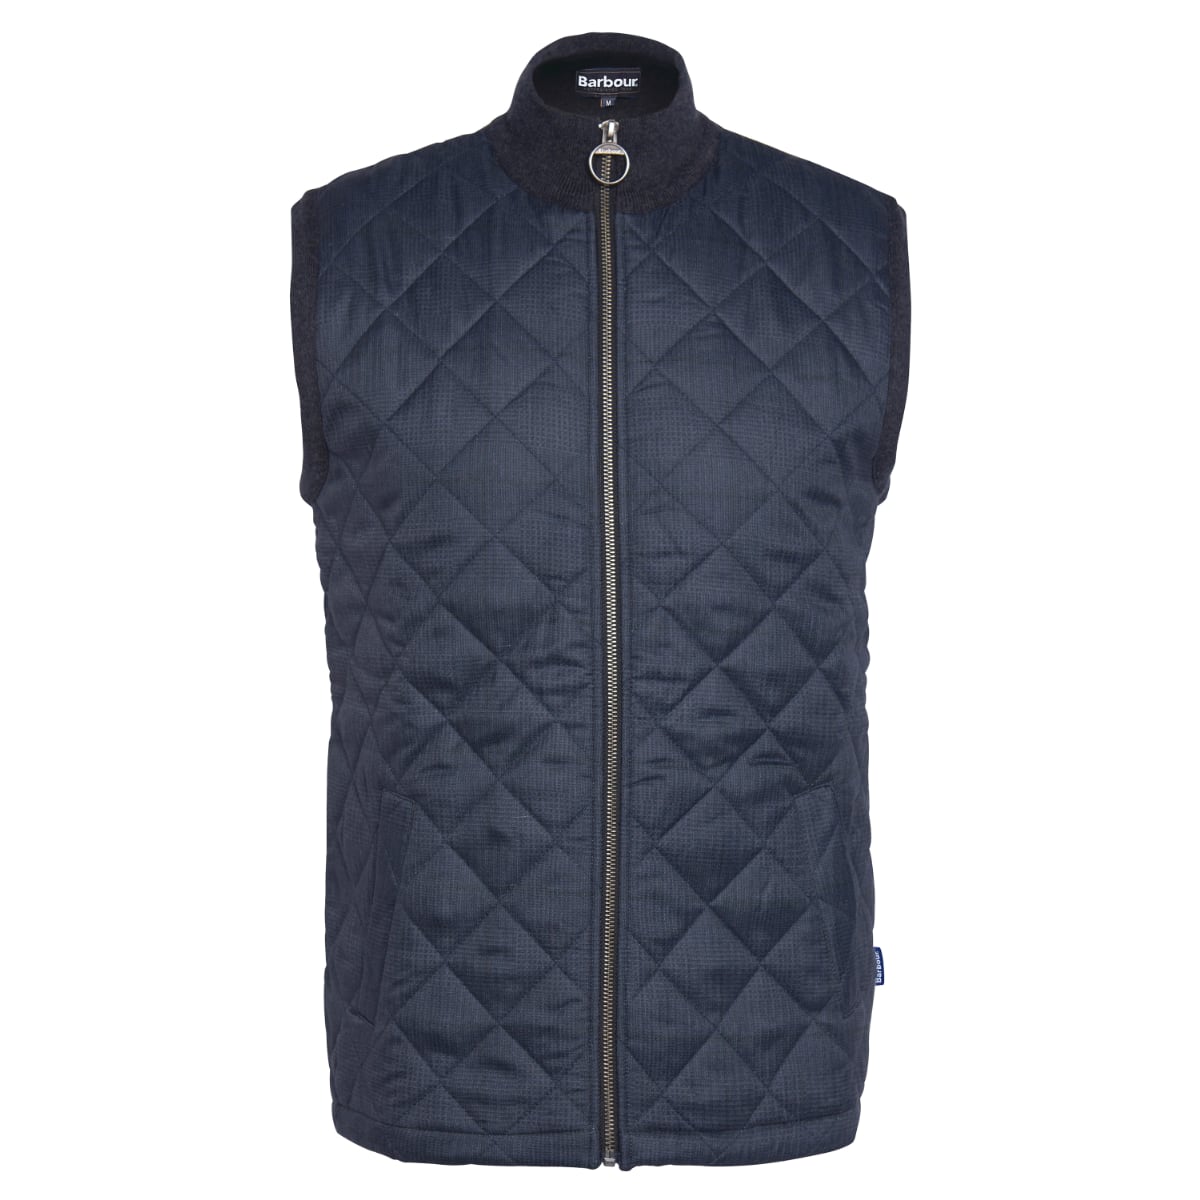 Barbour Cresswell Men's Gilet | Charcoal